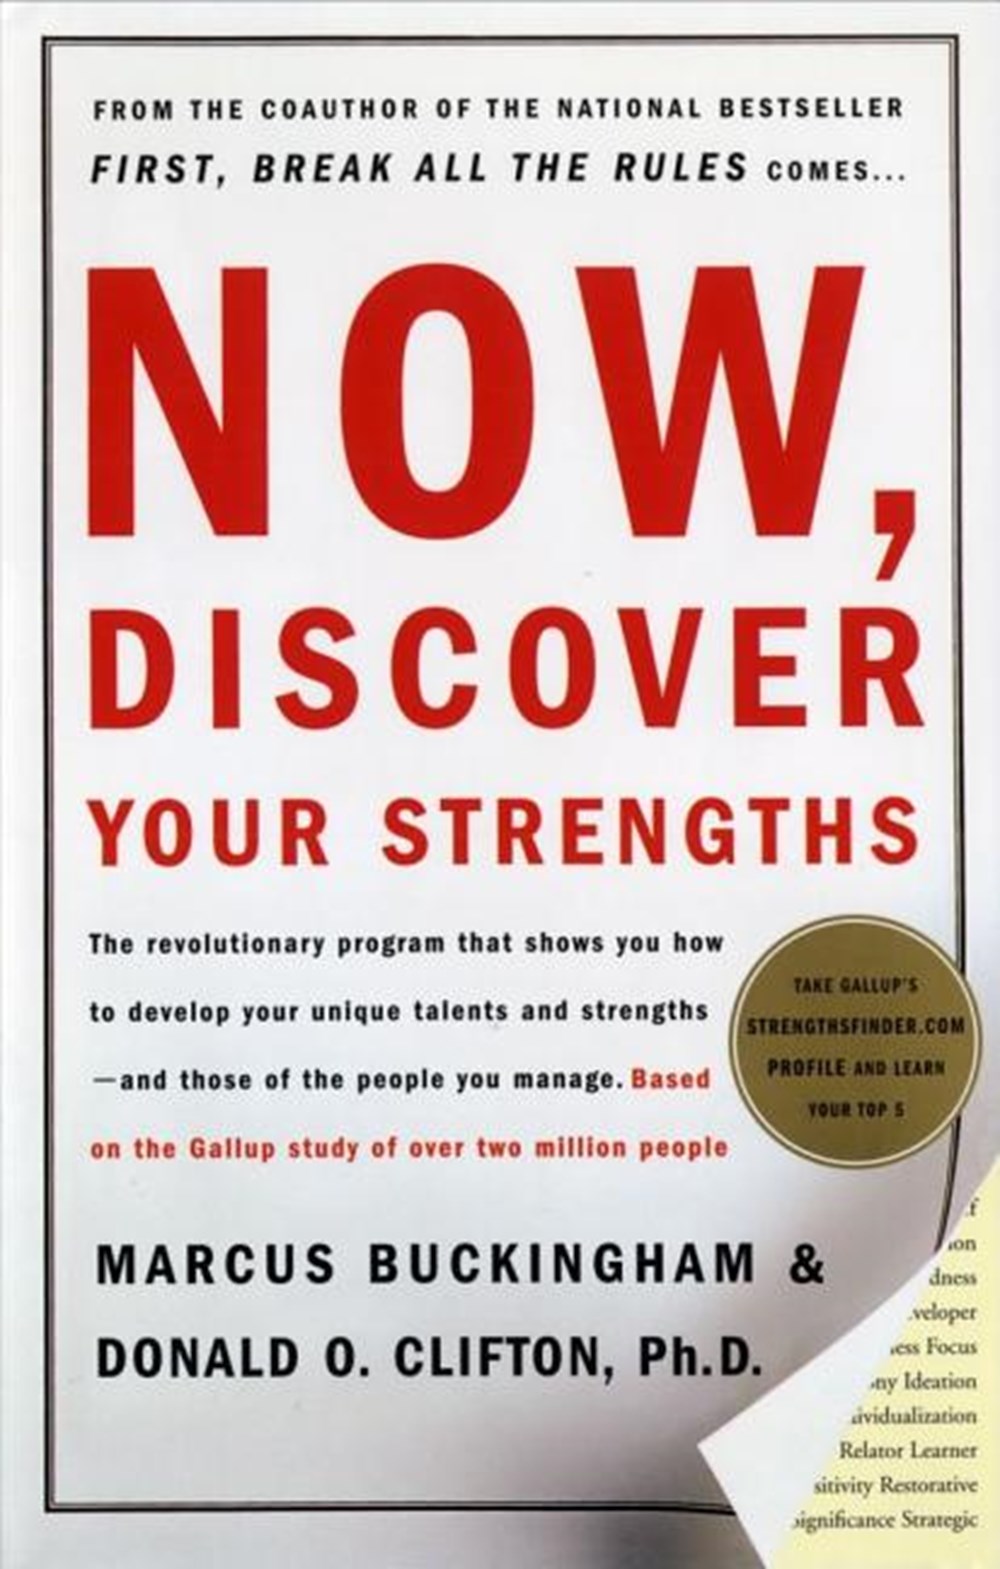 Now, Discover Your Strengths The Revolutionary Gallup Program That Shows You How to Develop Your Uni